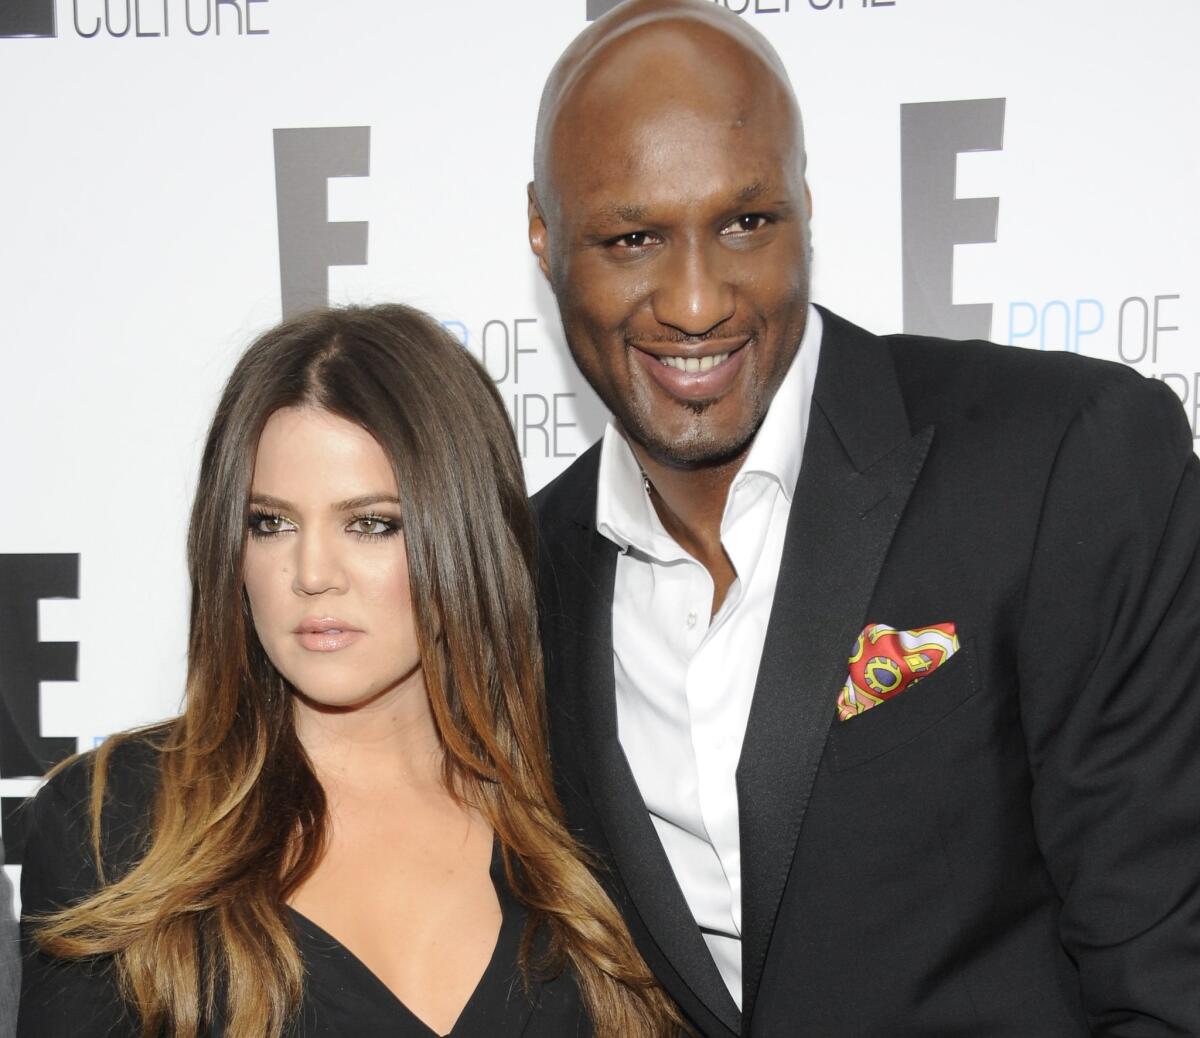 Khloe Kardashian had a strongly worded response on Twitter to those who say she's cashing in on estranged husband Lamar Odom's health scare. The couple is seen here at a 2012 event.